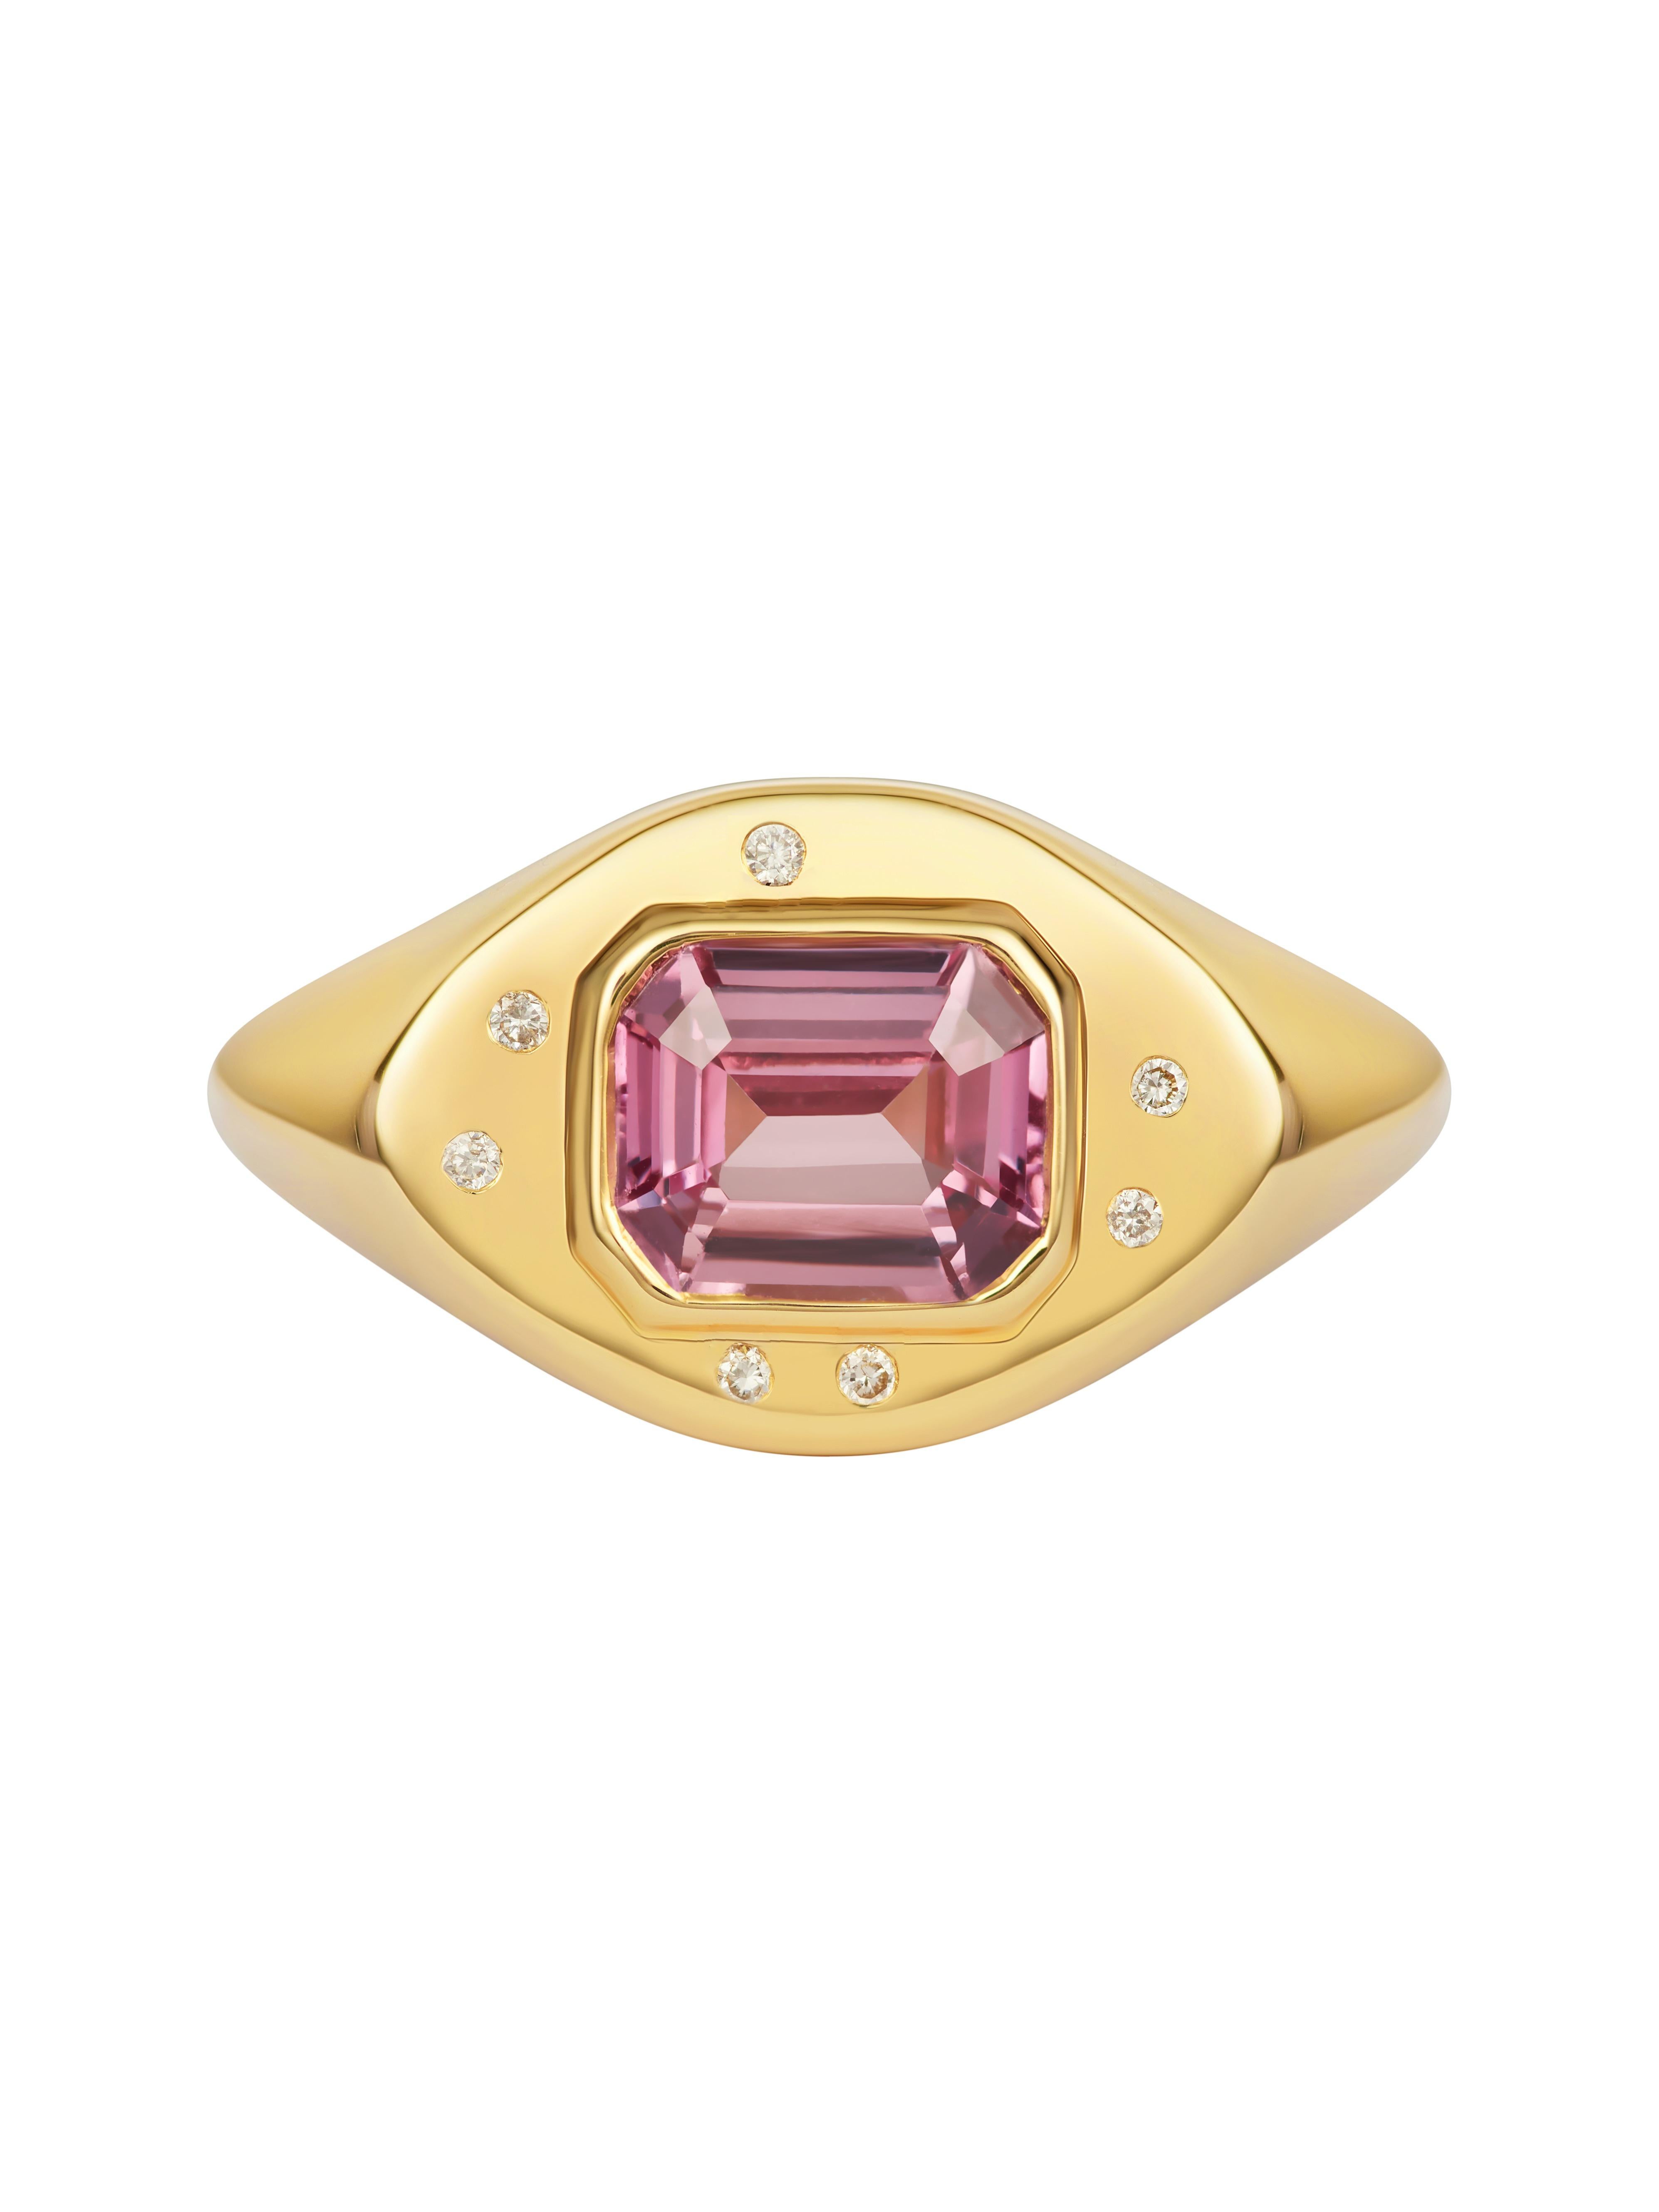 Emerald Cut Certified Natural Pink Sapphire Signet Ring  For Sale